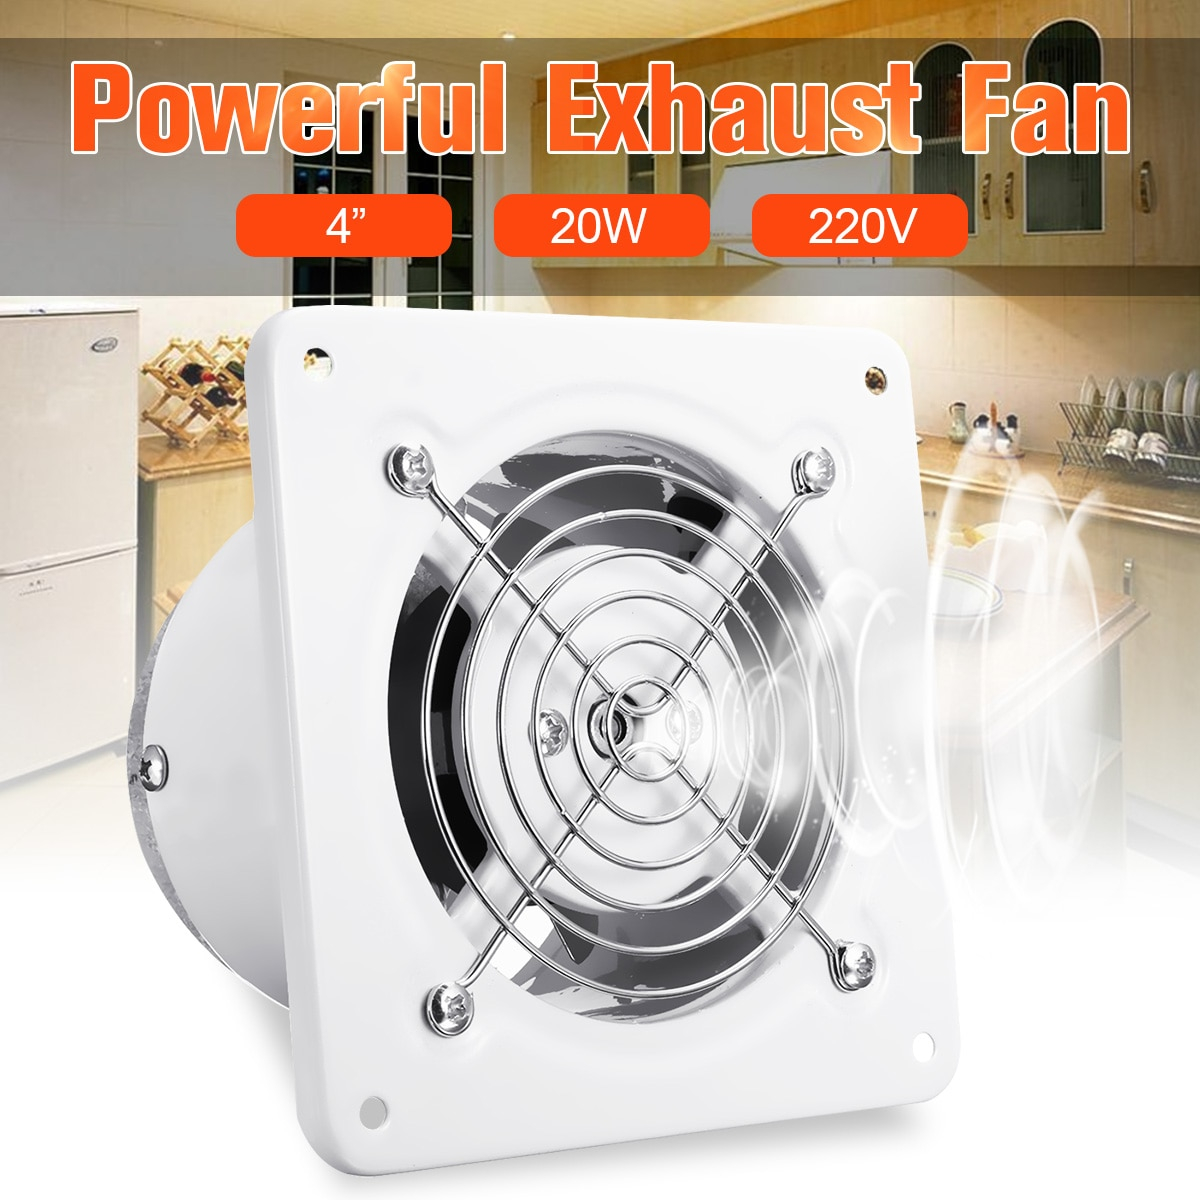 Us 1308 40 Off4 Inch 20w 220v Ventilating Exhaust Extractor Fan Window Wall Kitchen Toilet Bathroom Duct Booster Blower Air Clean Cooling for dimensions 1200 X 1200